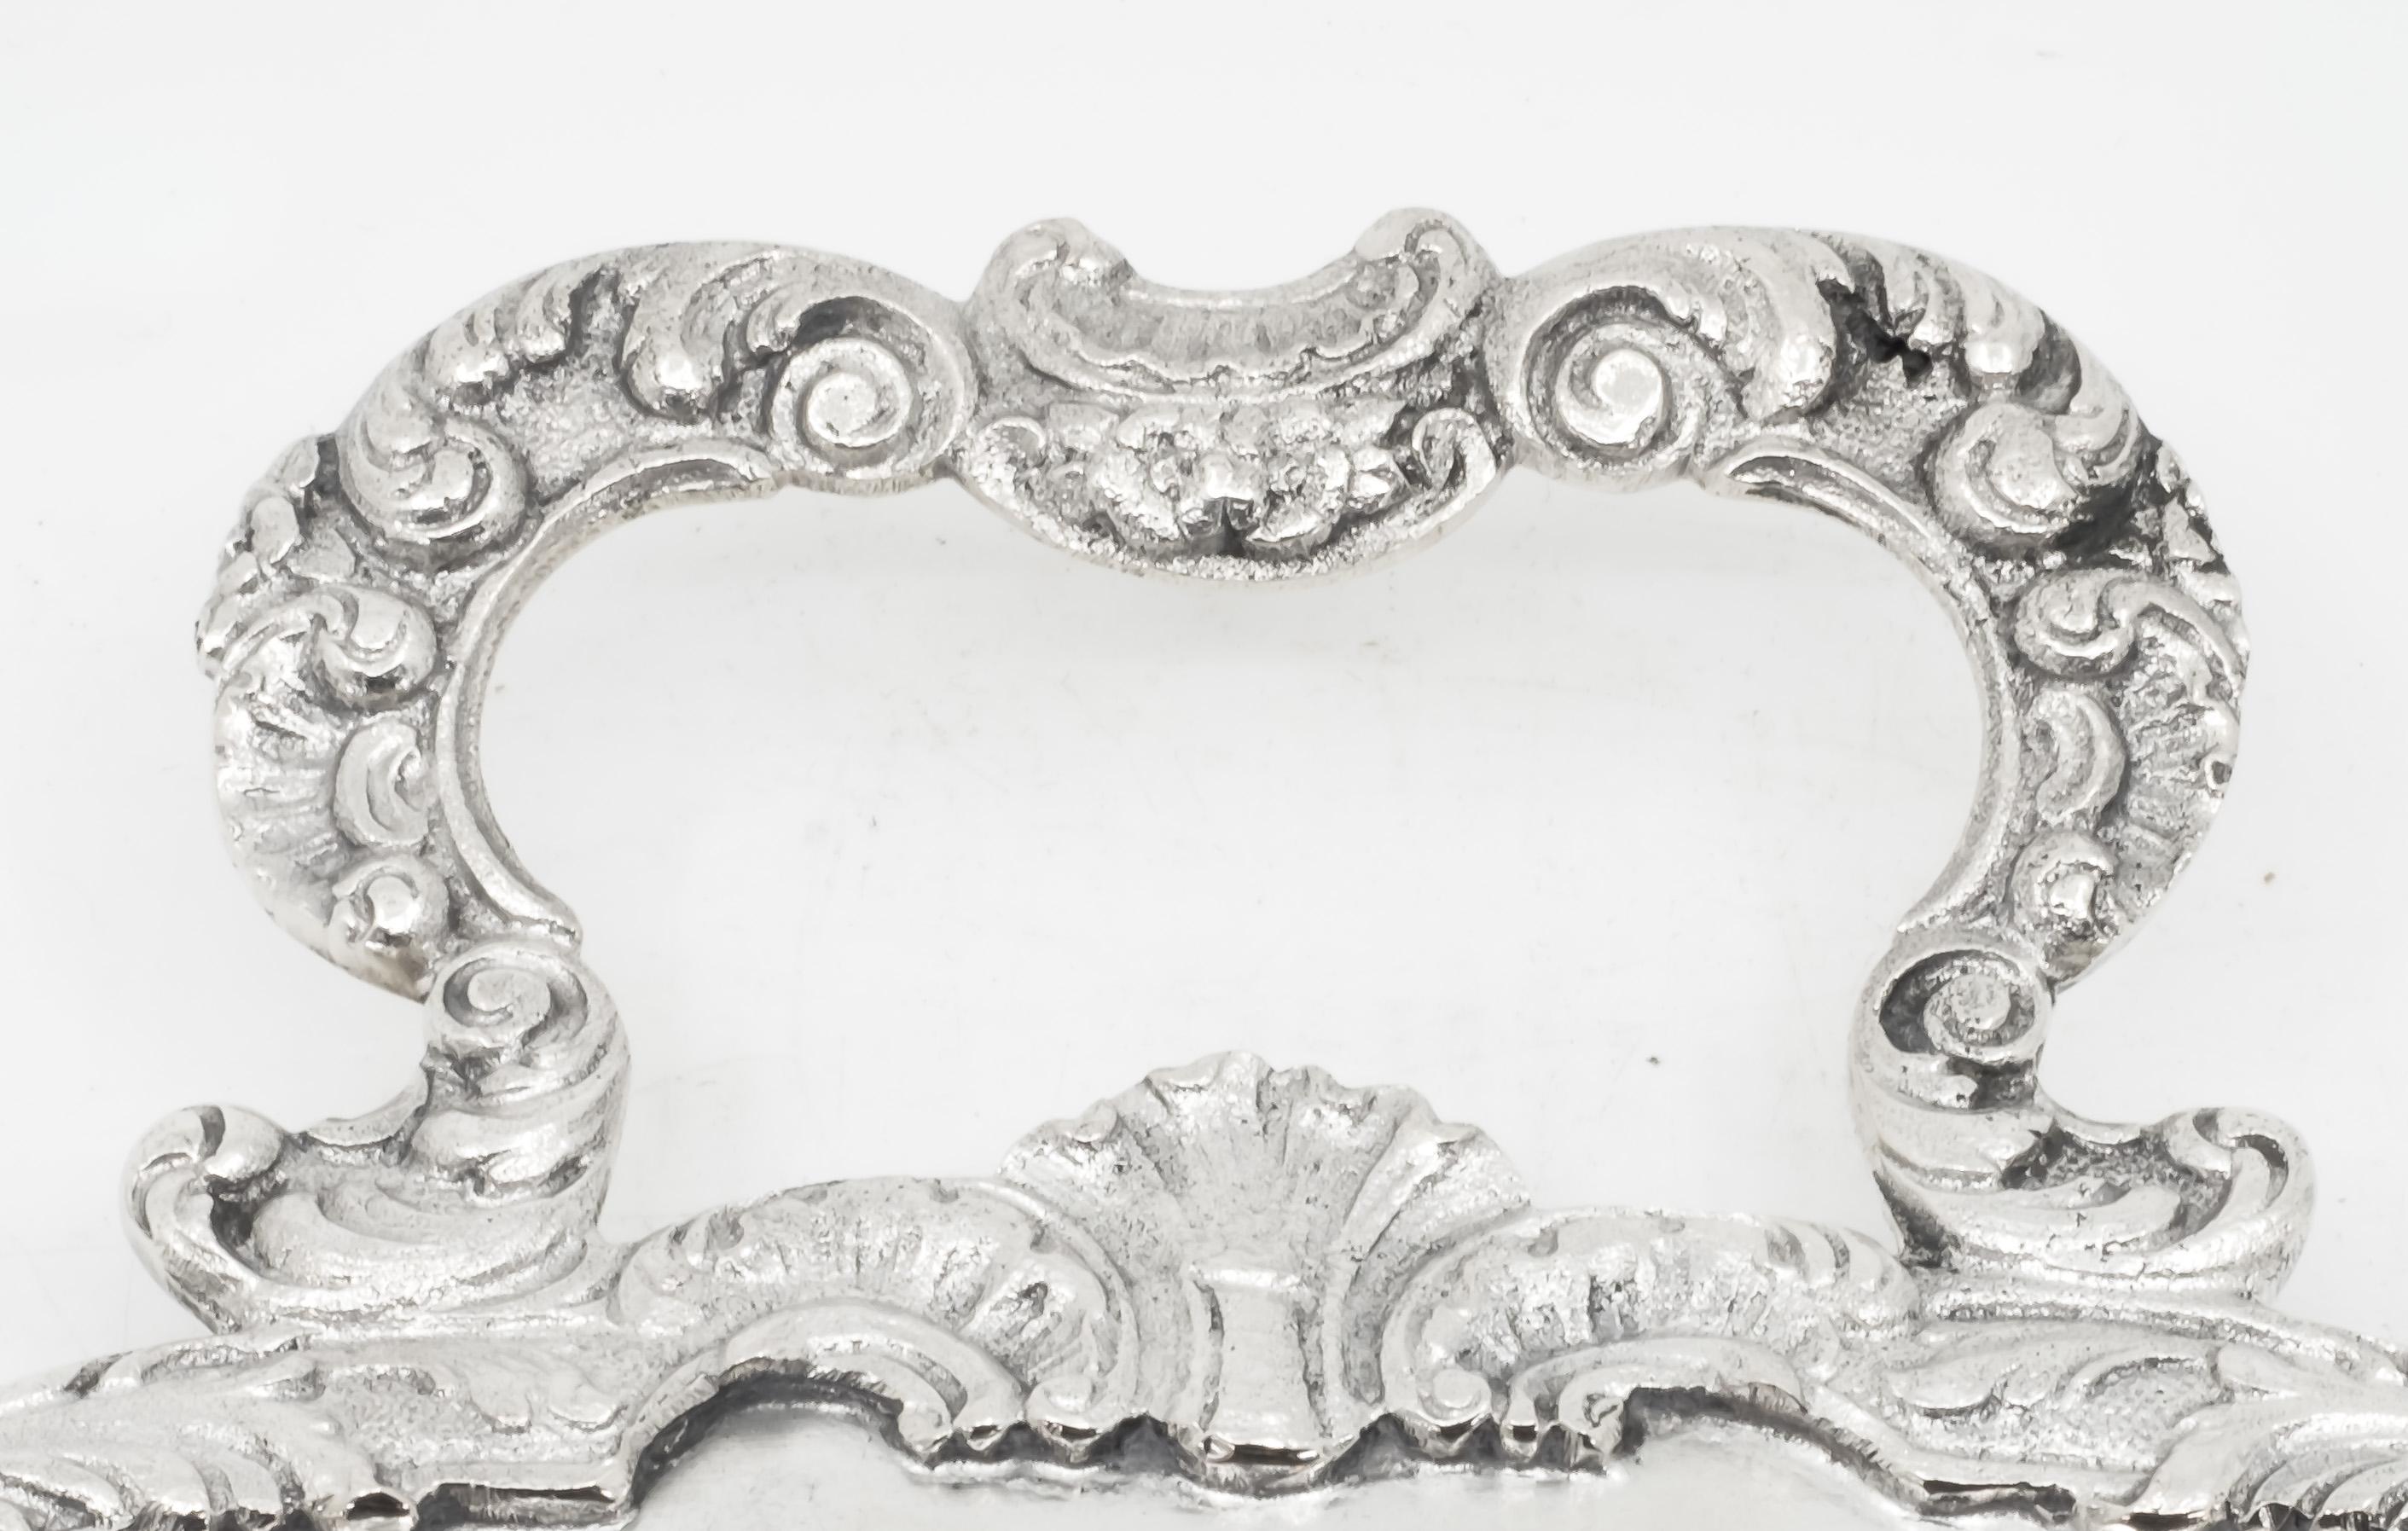 German late 19th-early 20th century oval shaped silver 800 serving tray with scroll handles.
The stepped surface is worked in a border decorated with foliage scrolls and shell motifs. Both handles feature C-shaped scrolls
The piece is hallmarked